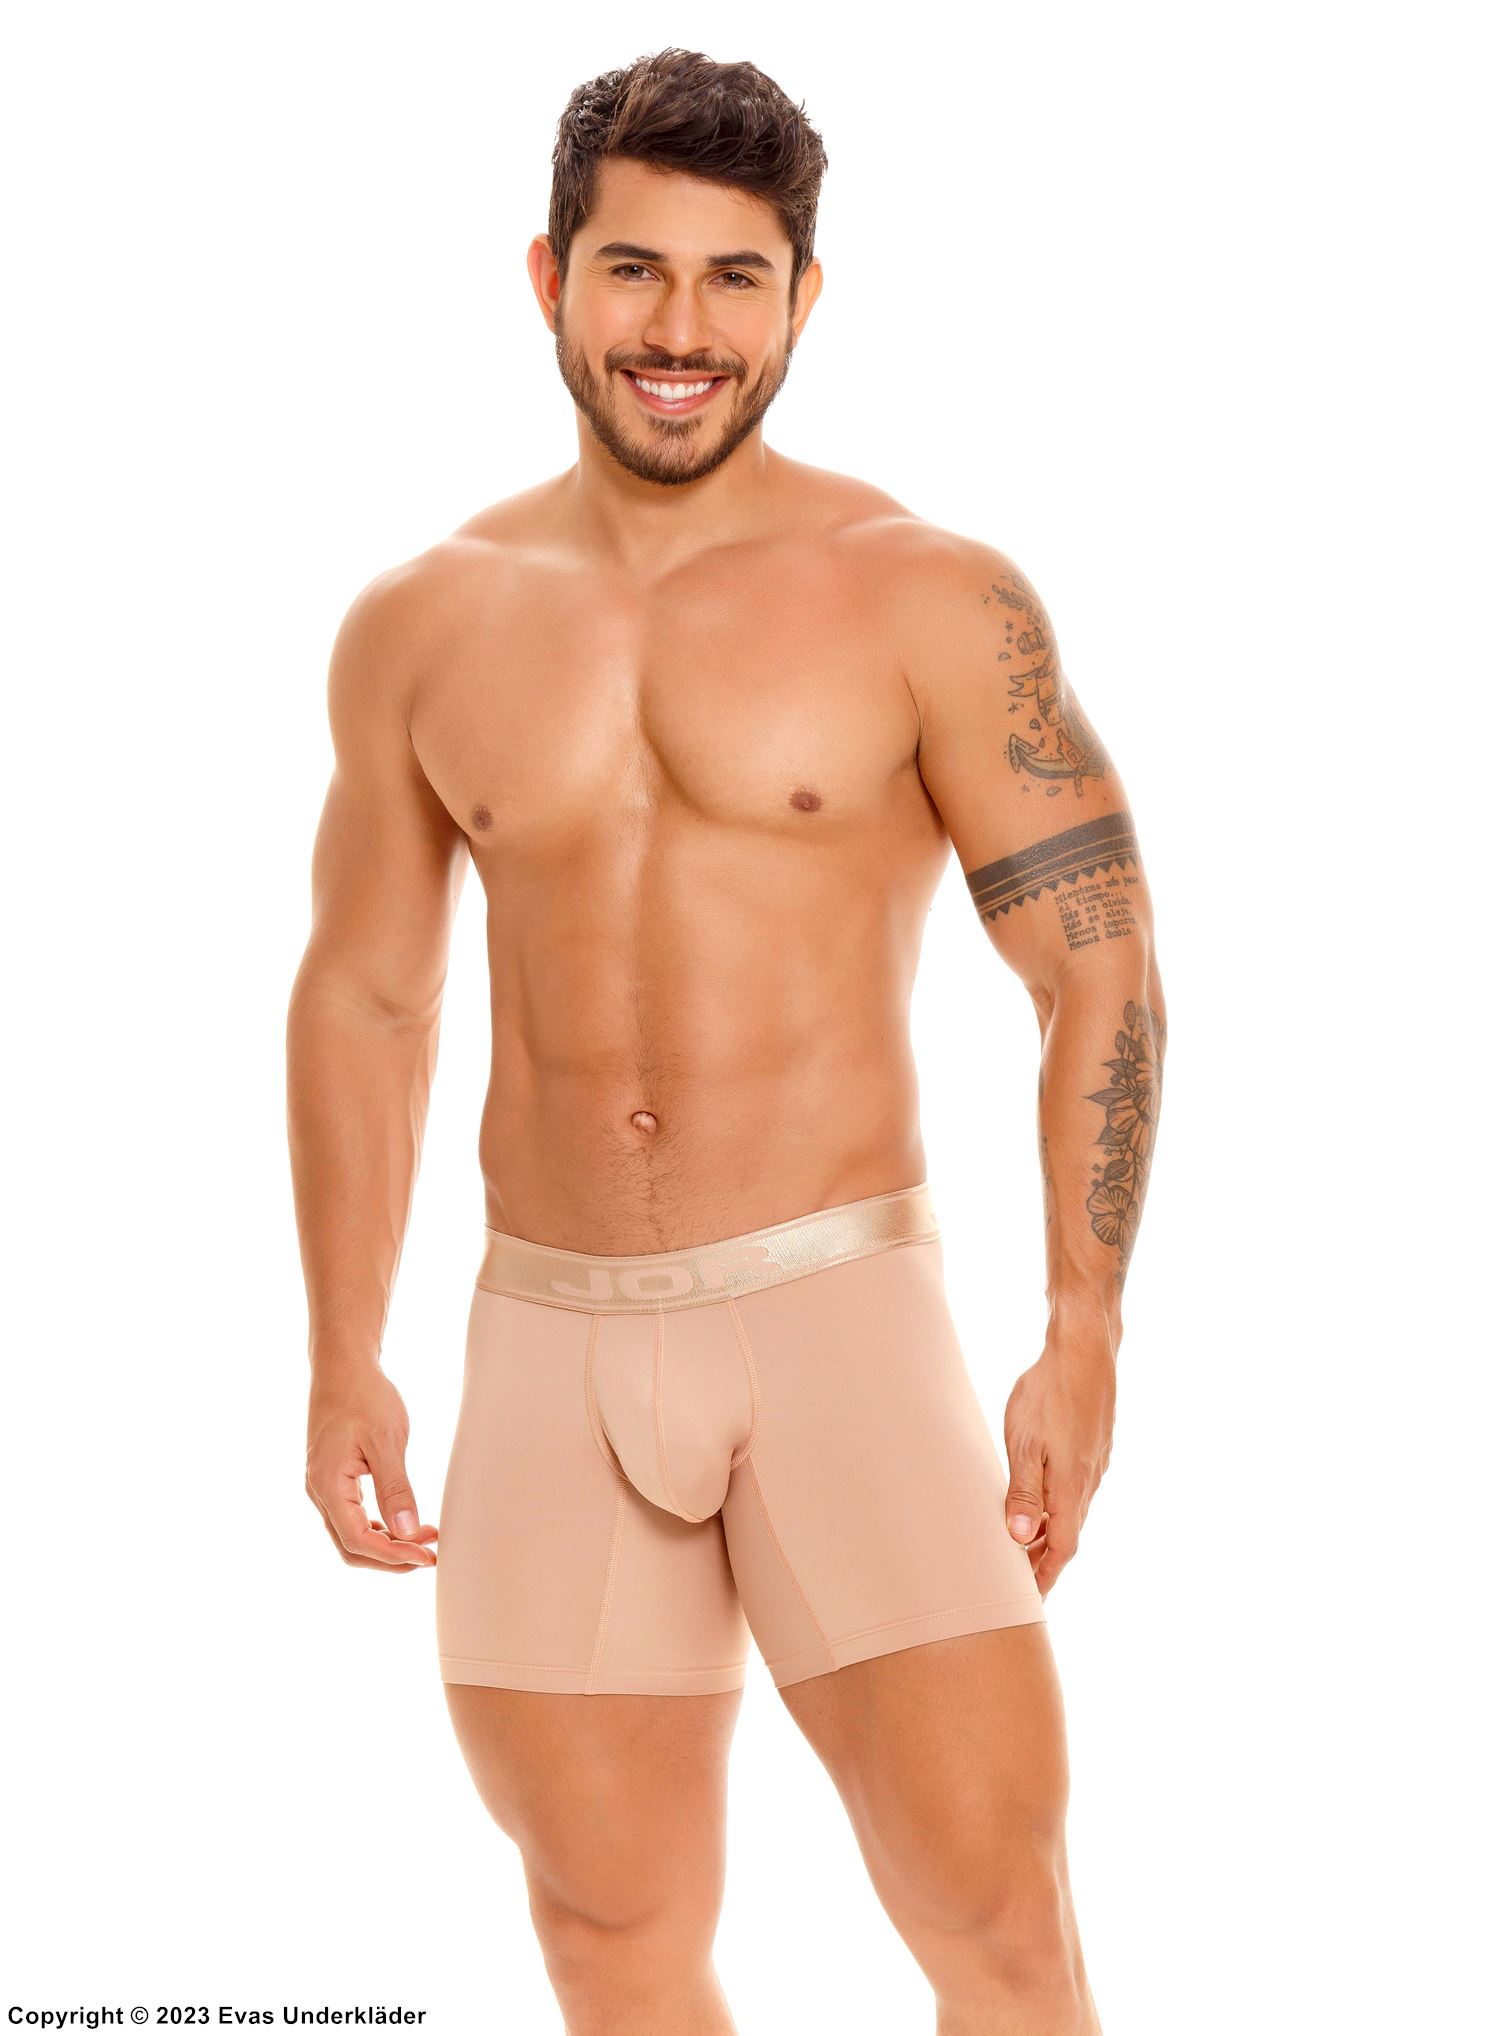 Men's midway briefs, without pattern